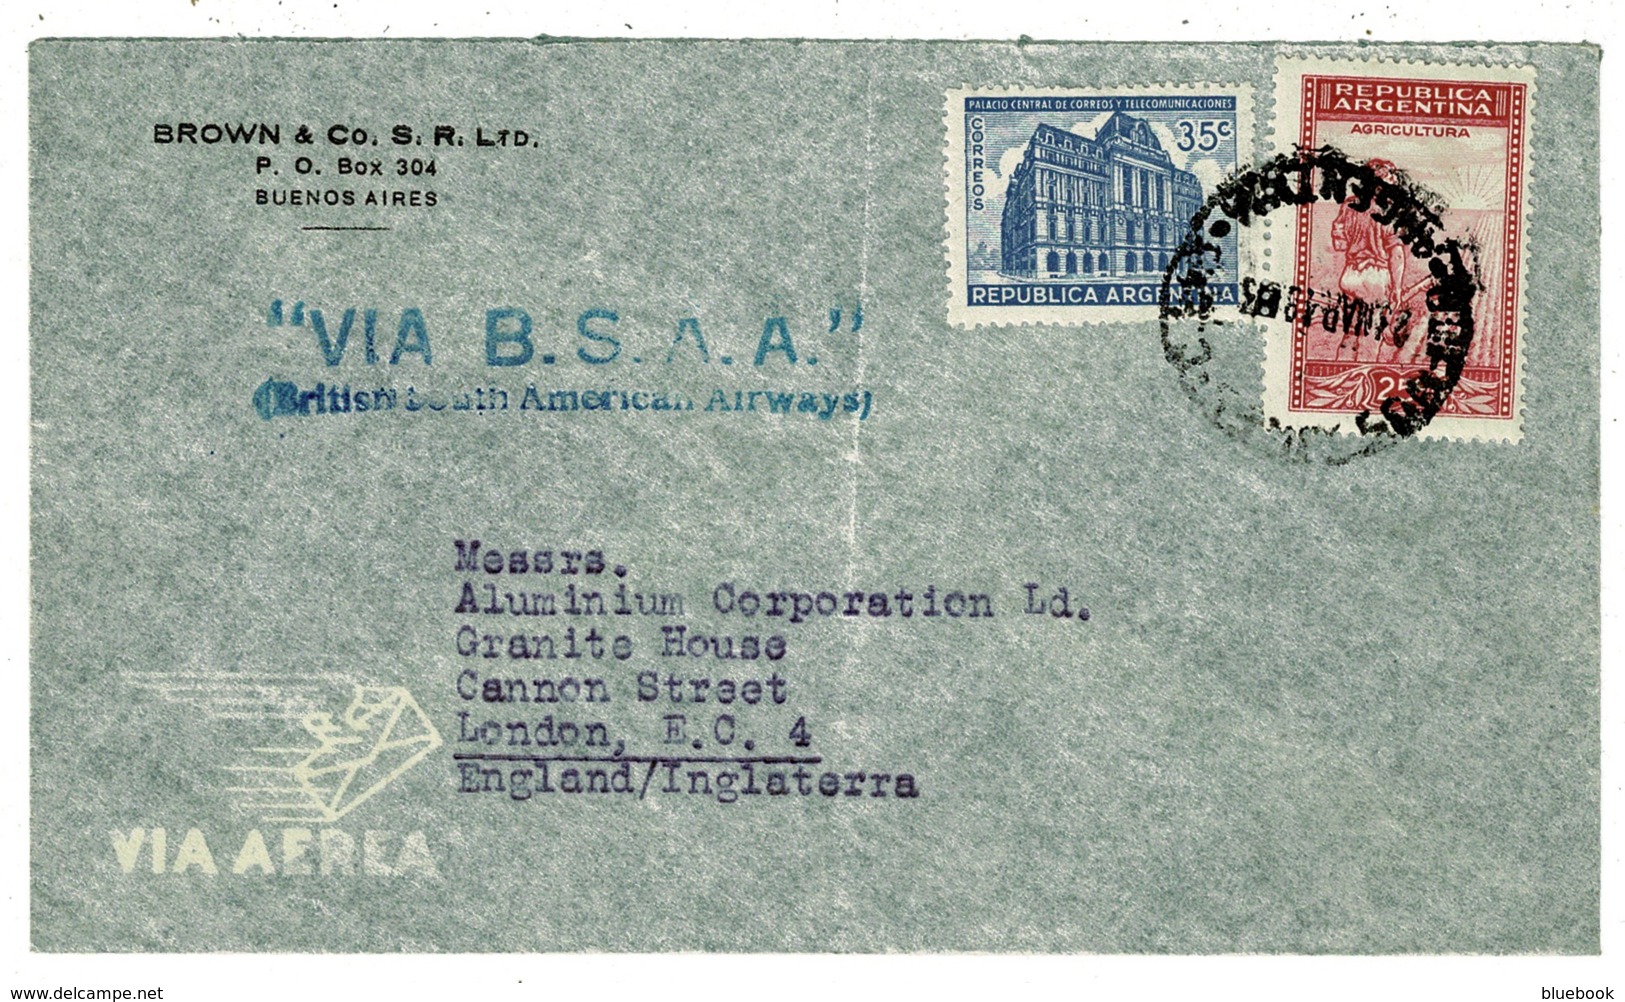 Ref 1343 - 1948 Airmail Cover Argentina To London By British South America Airways B.S.A.A. - Aéreo